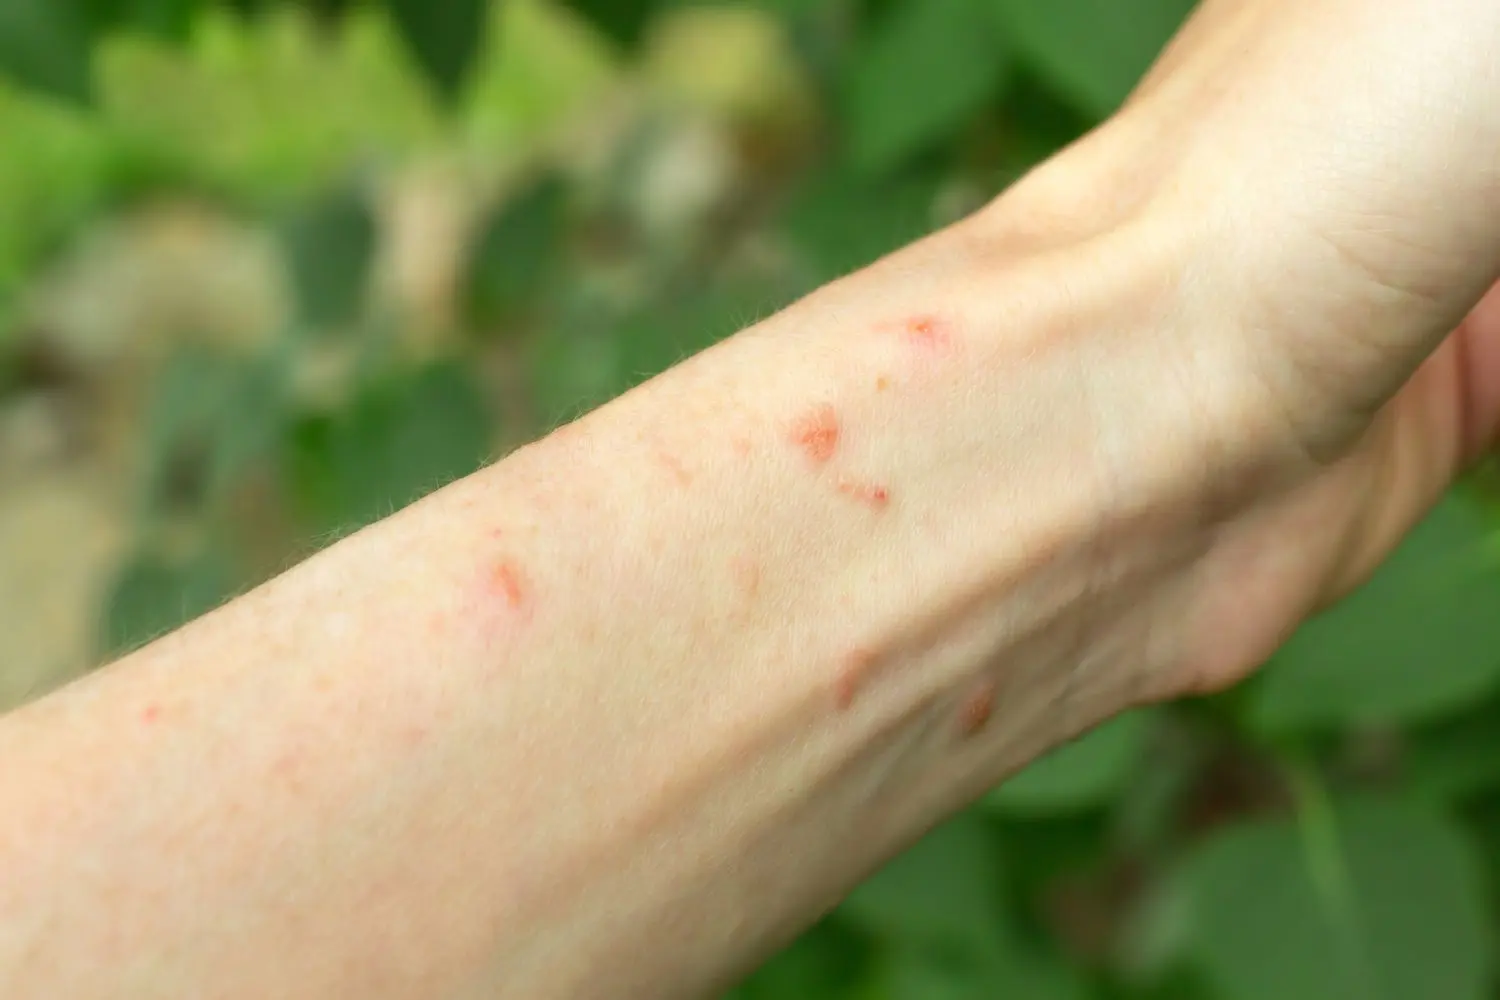 How to Get Rid of Poison Ivy Fast?